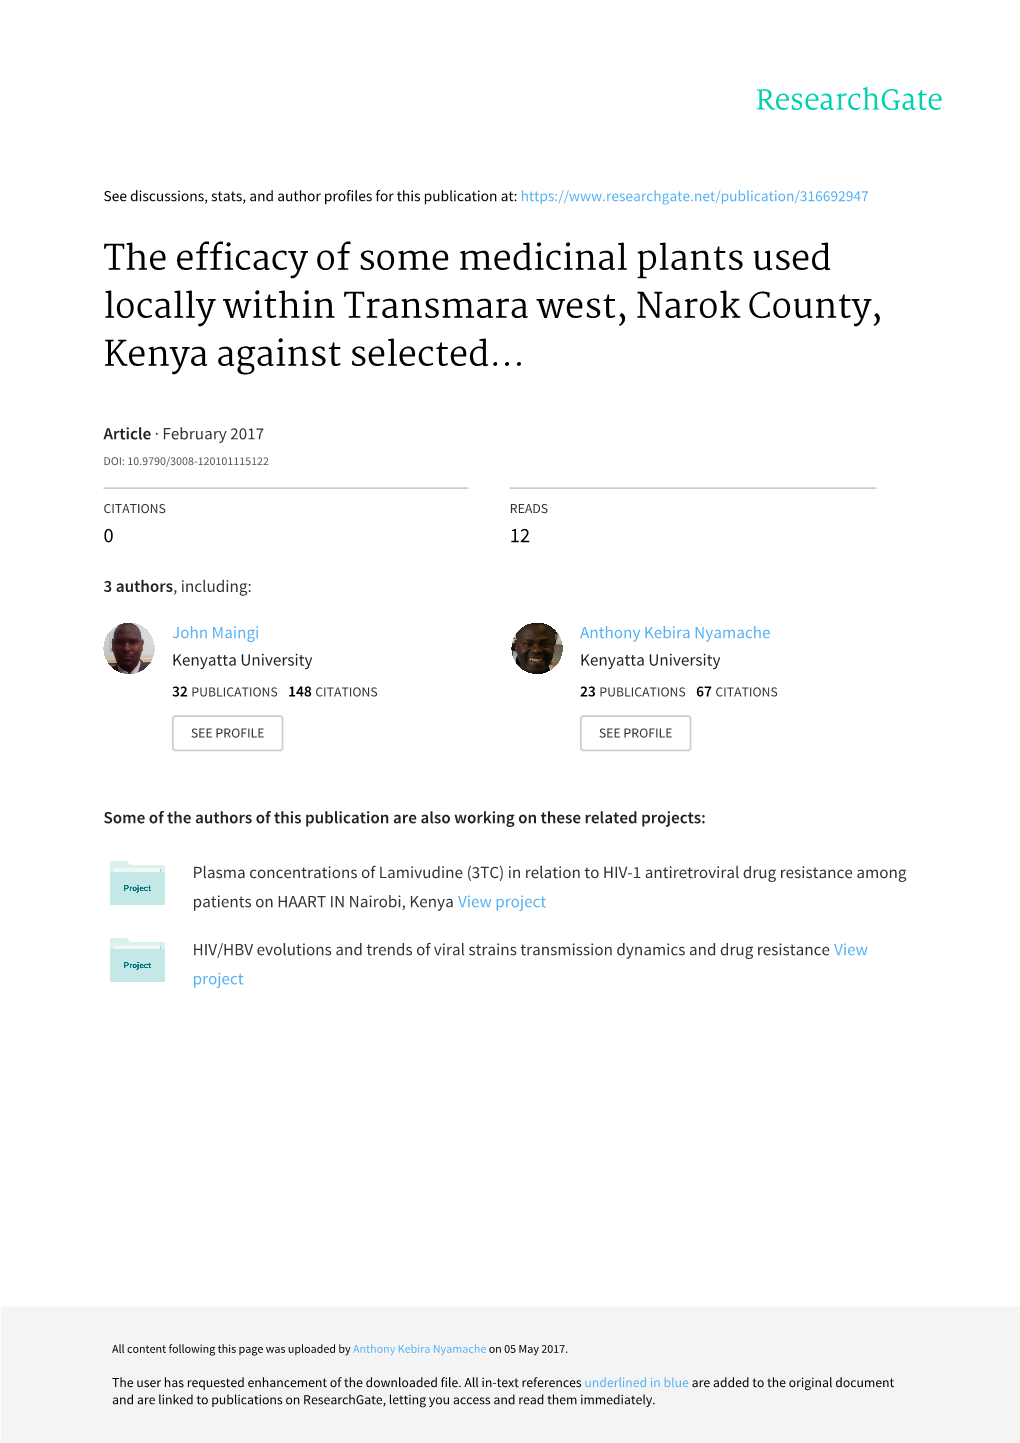 The Efficacy of Some Medicinal Plants Used Locally Within Transmara West, Narok County, Kenya Against Selected